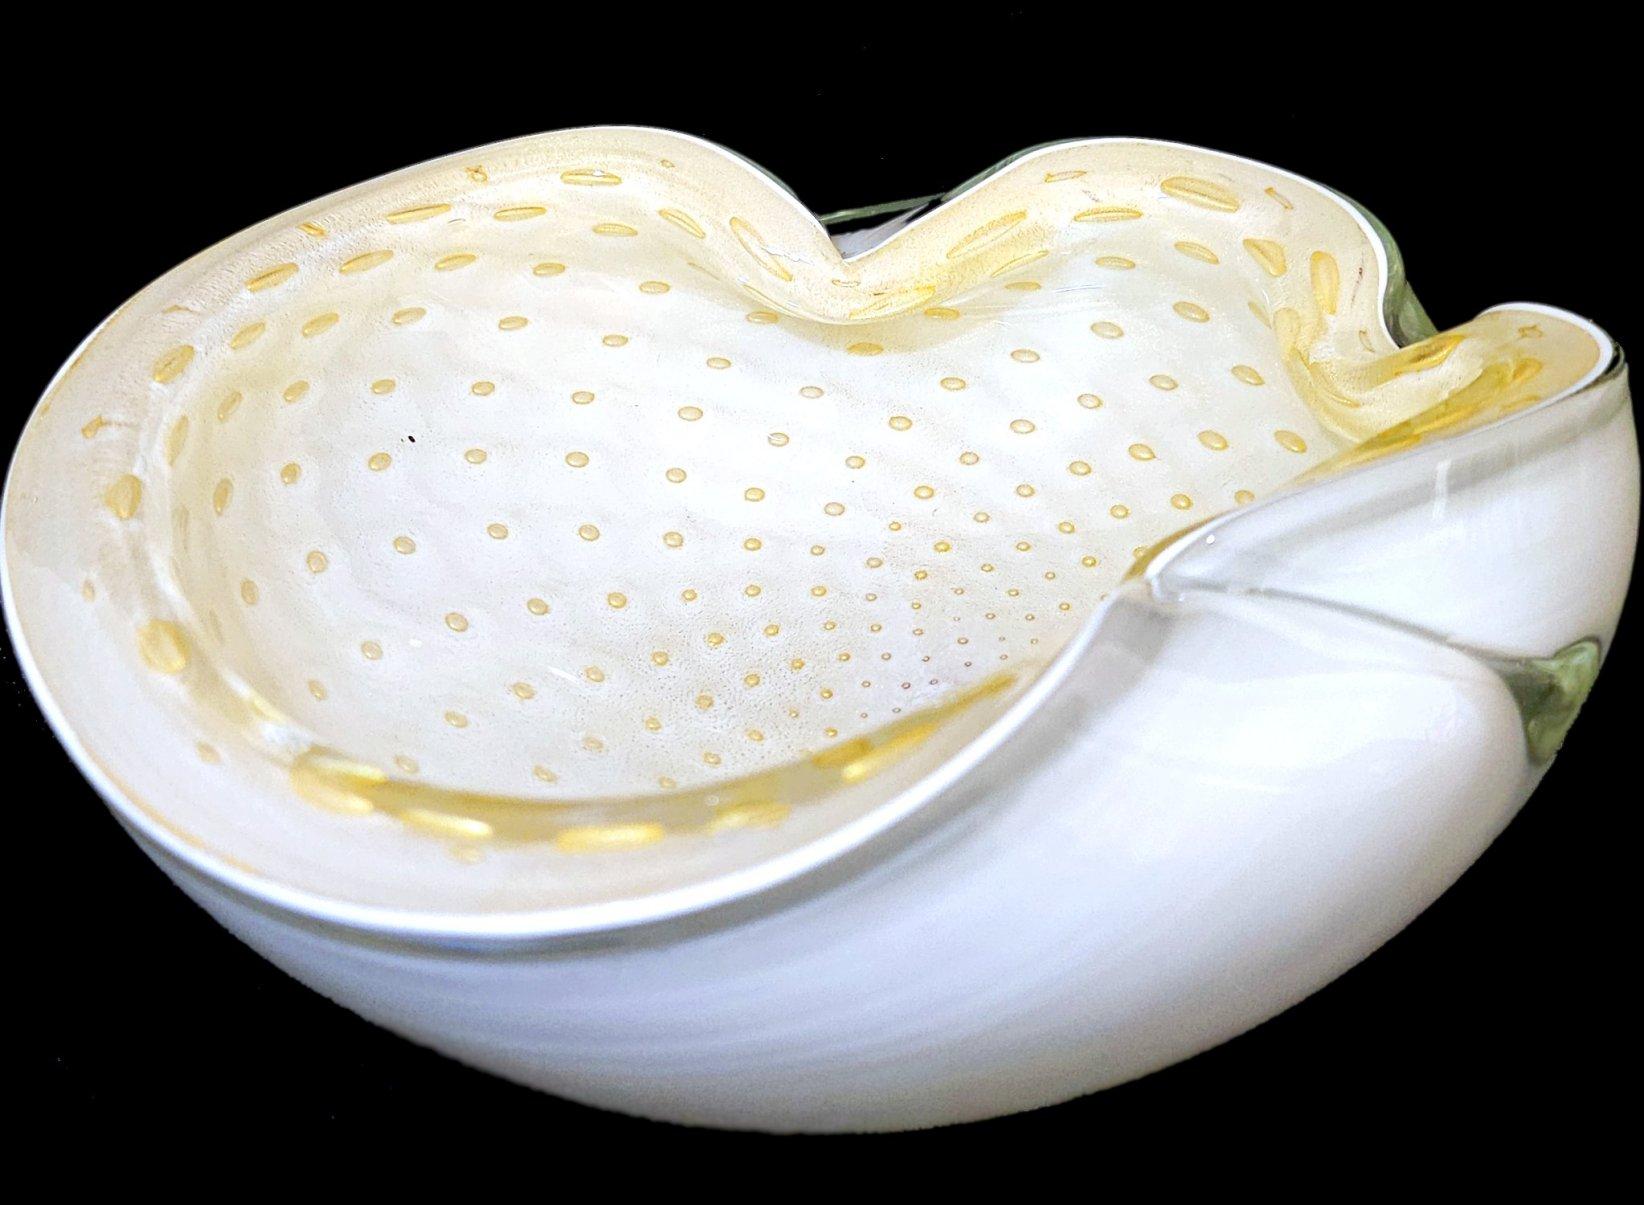 Alfredo Barbini Murano Glass Bullicante Bowl/Vide Poche with Gold Polveri
(The gold doesn't look neon yellow in person as it does in some of these photos. It's the gold polveri seen in the works of Barbini and other maestros.
Measures about 7 x 2.25